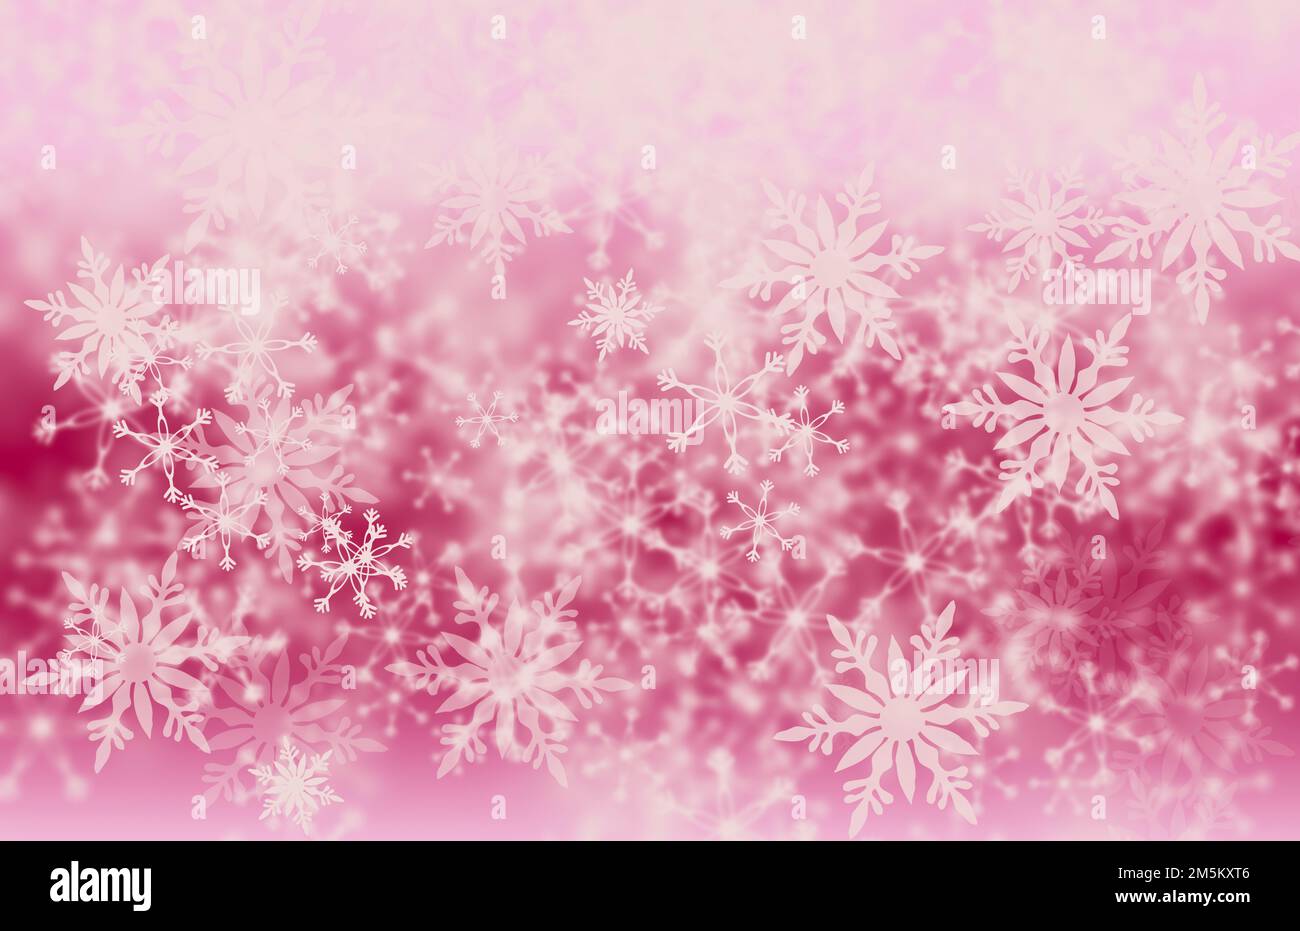 computer generated high resolution image of red snowflakes abstract background Stock Photo